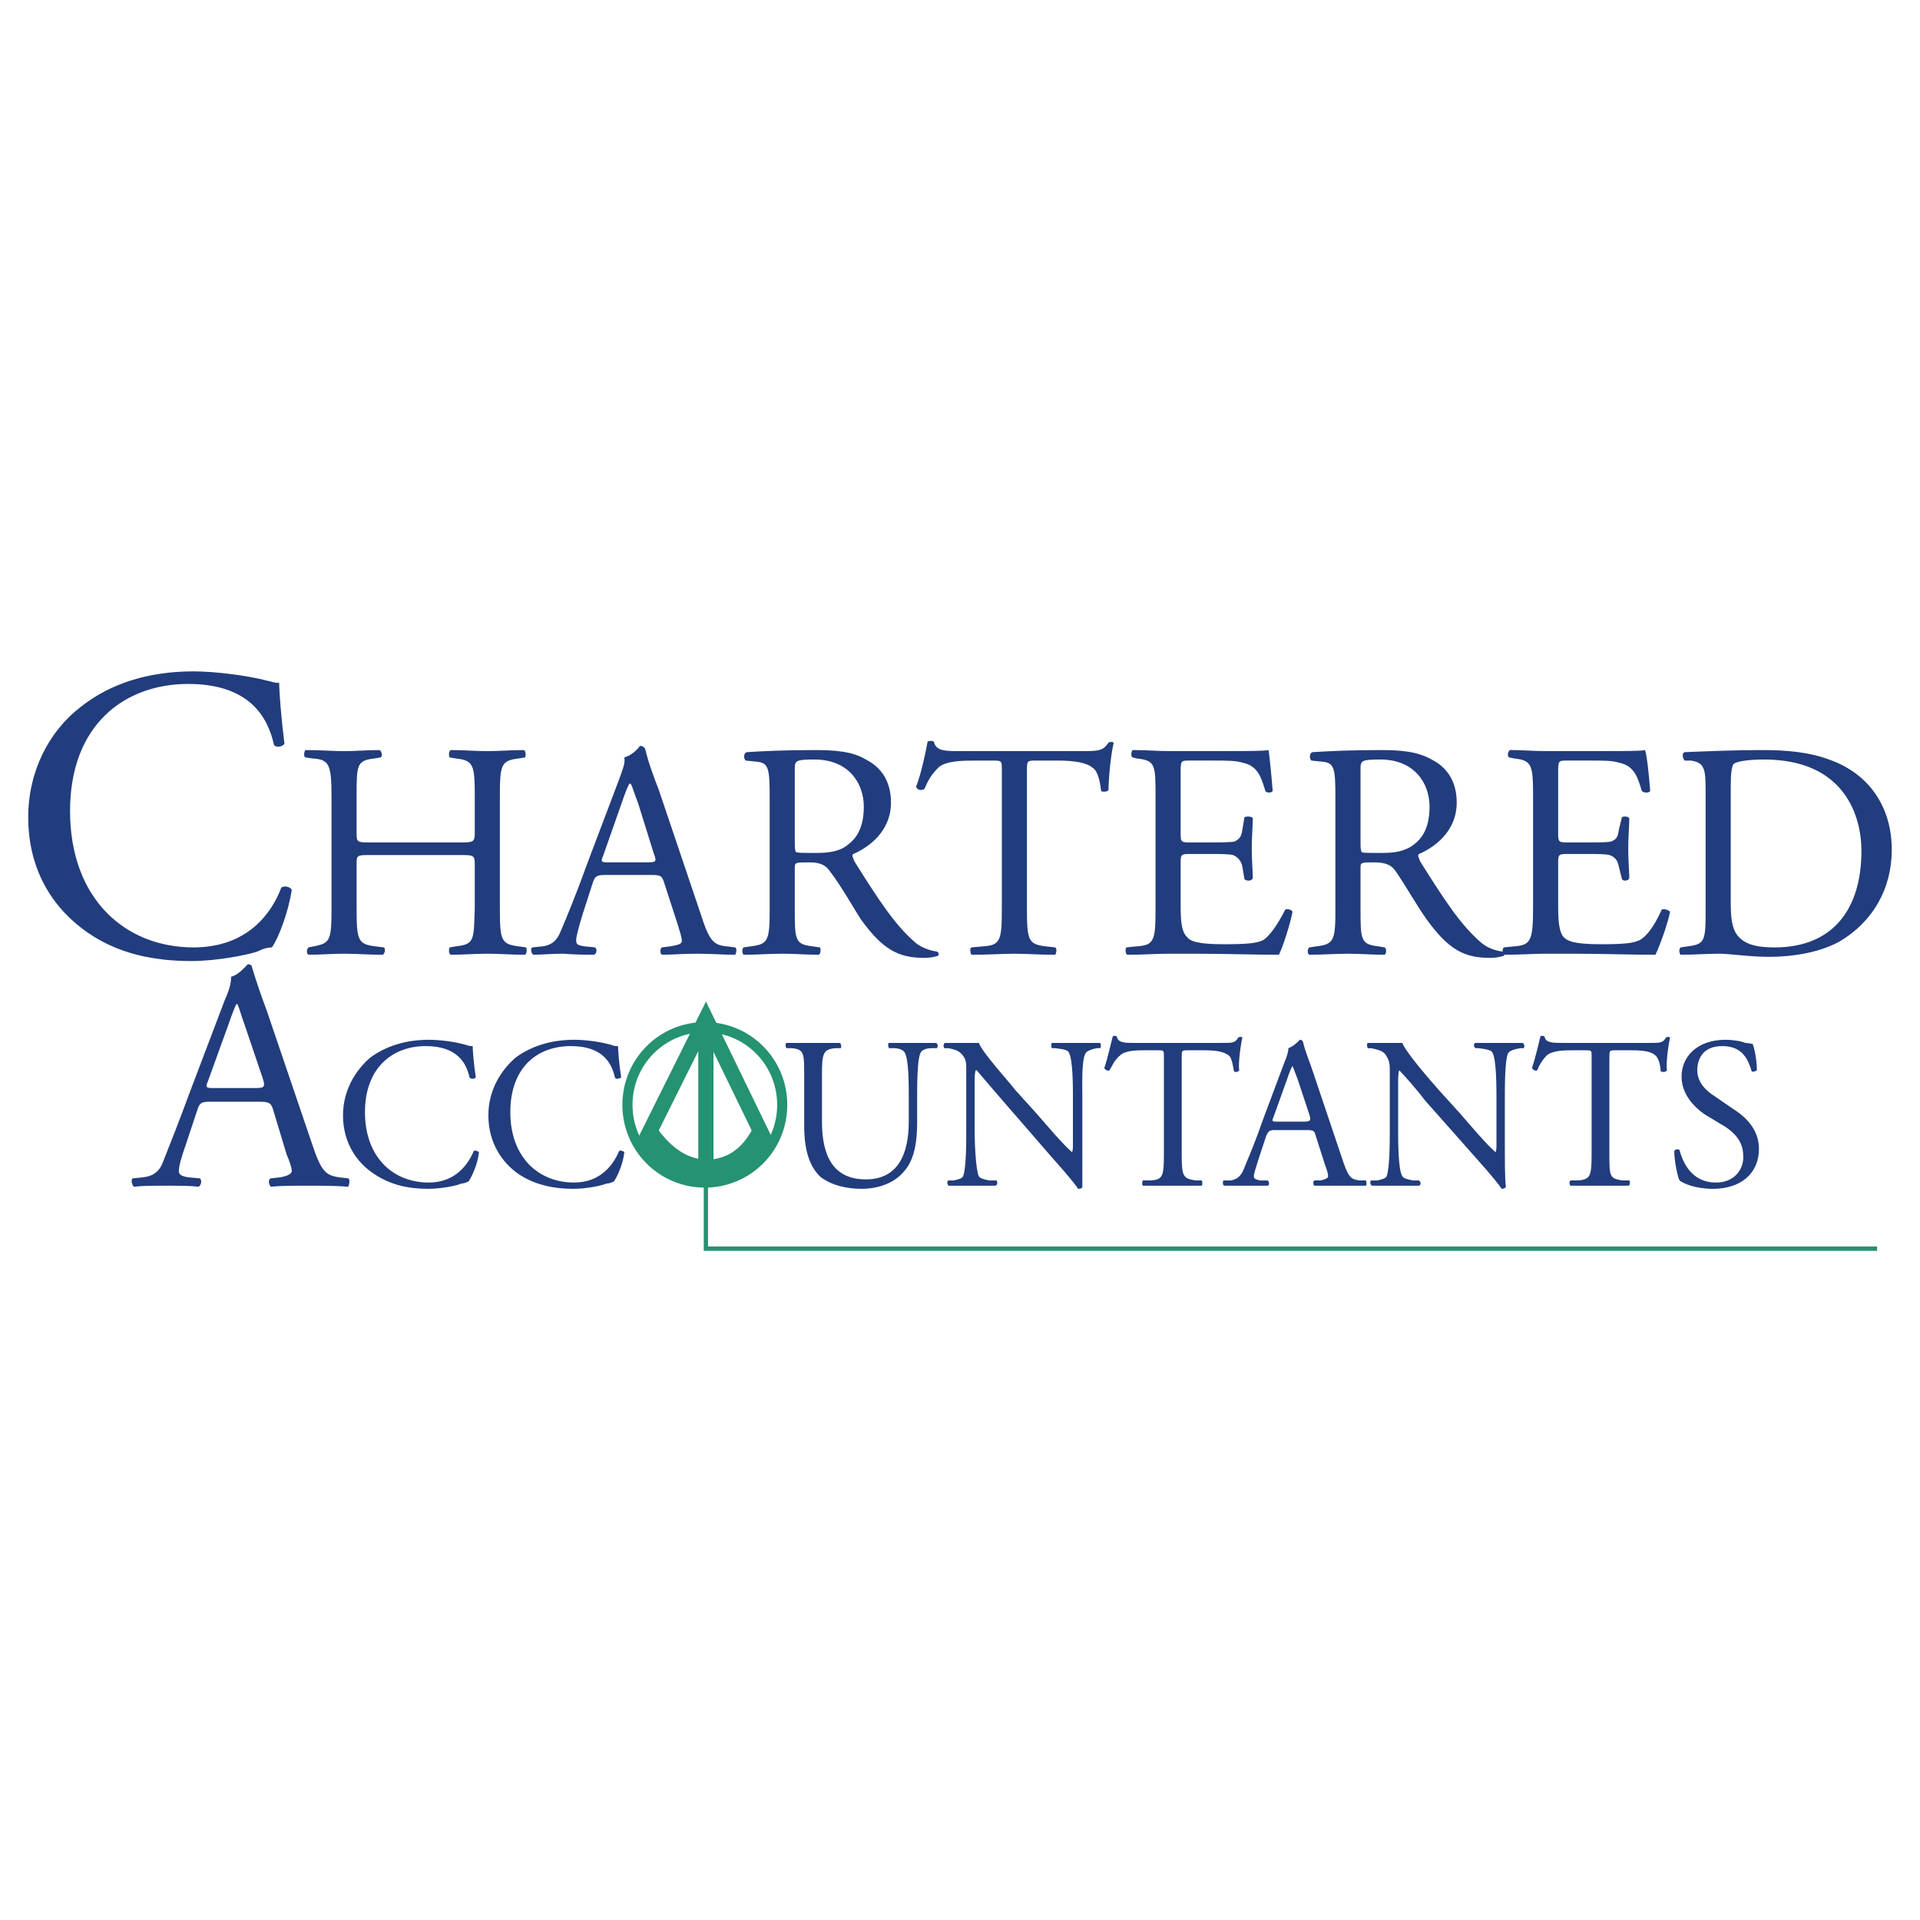 Free Chartered Accountant Wallpaper Downloads, [100+] Chartered Accountant  Wallpapers for FREE 